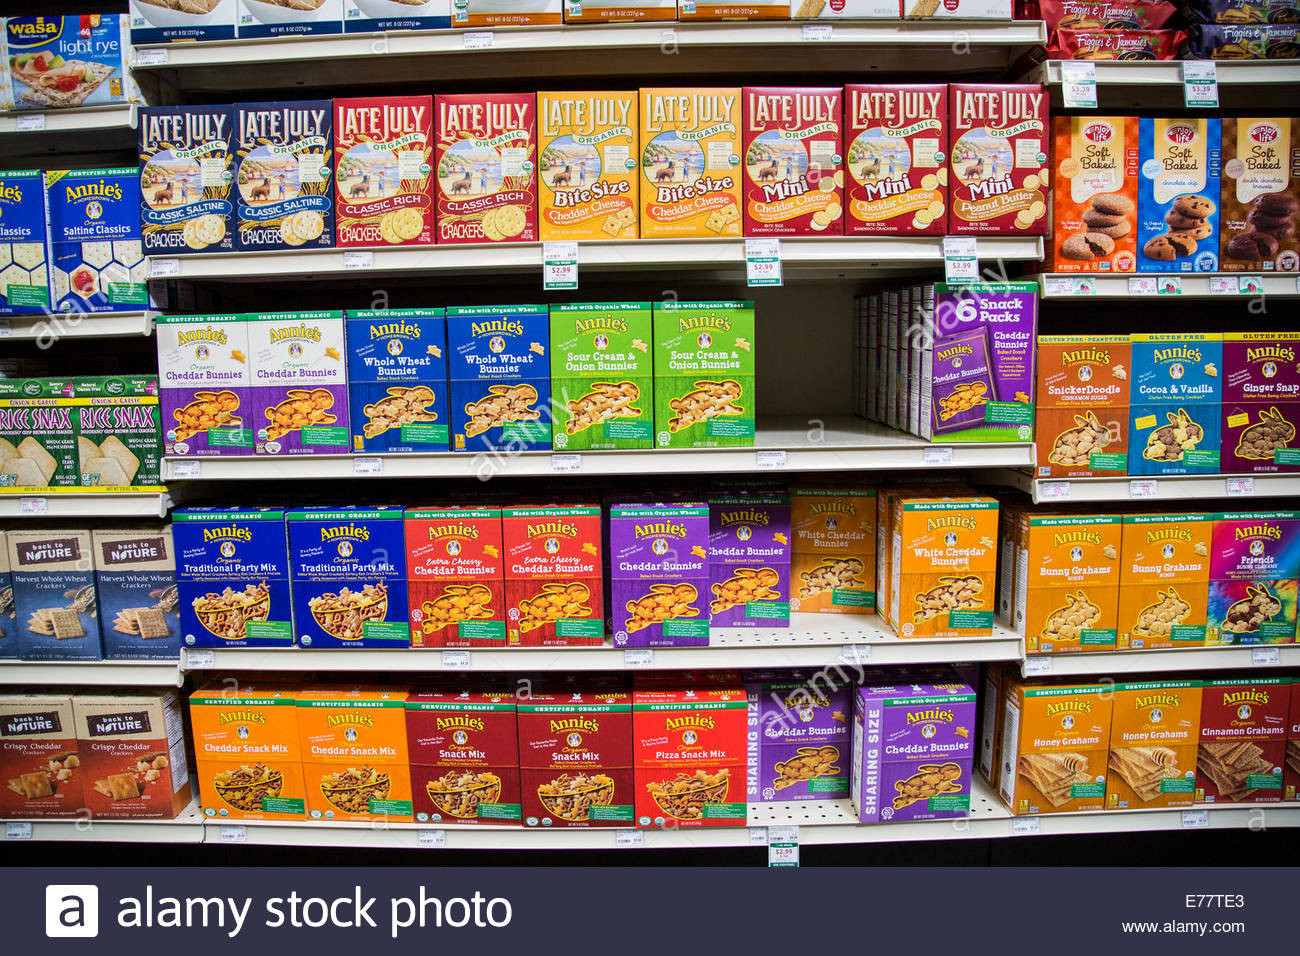 Healthy Convenience Store Snacks
 A natural foods grocery store aisle with shelves of